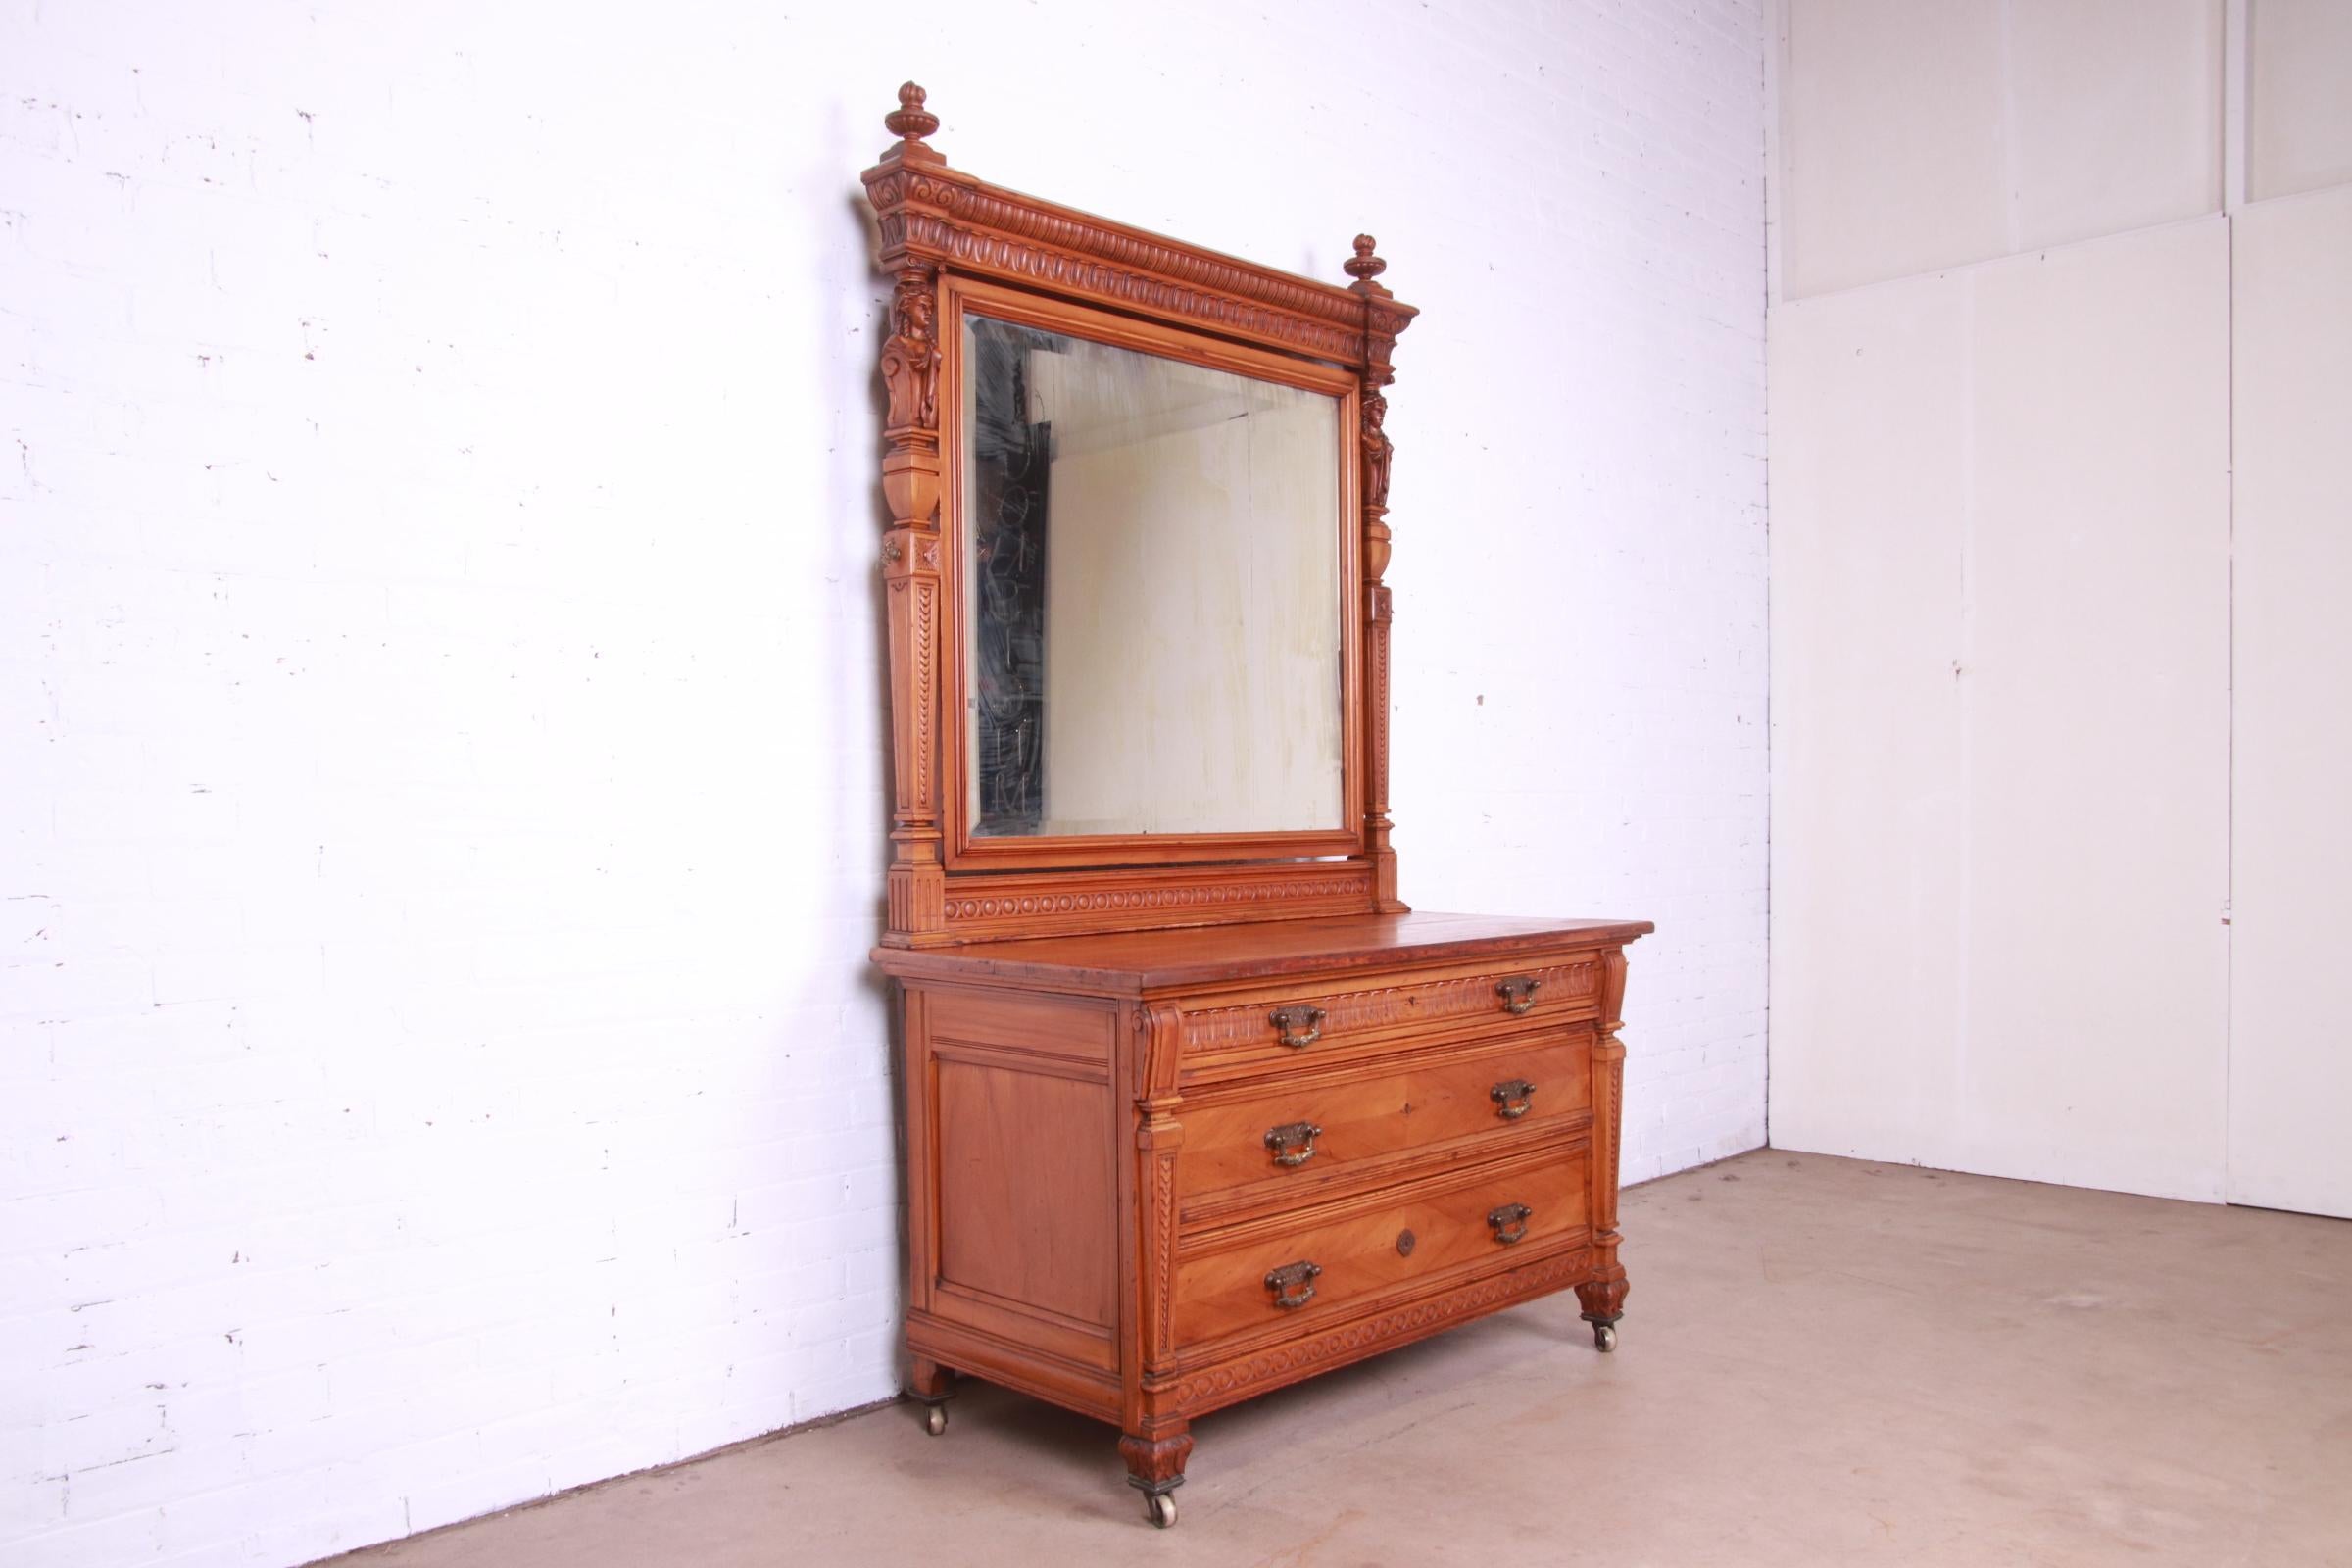 A beautiful antique Renaissance Revival or Victorian dresser with mirror

Attributed to R.J. Horner & Co.

USA, Circa 1890s

Ornate carved walnut, with original brass hardware.

Measures: 51.25